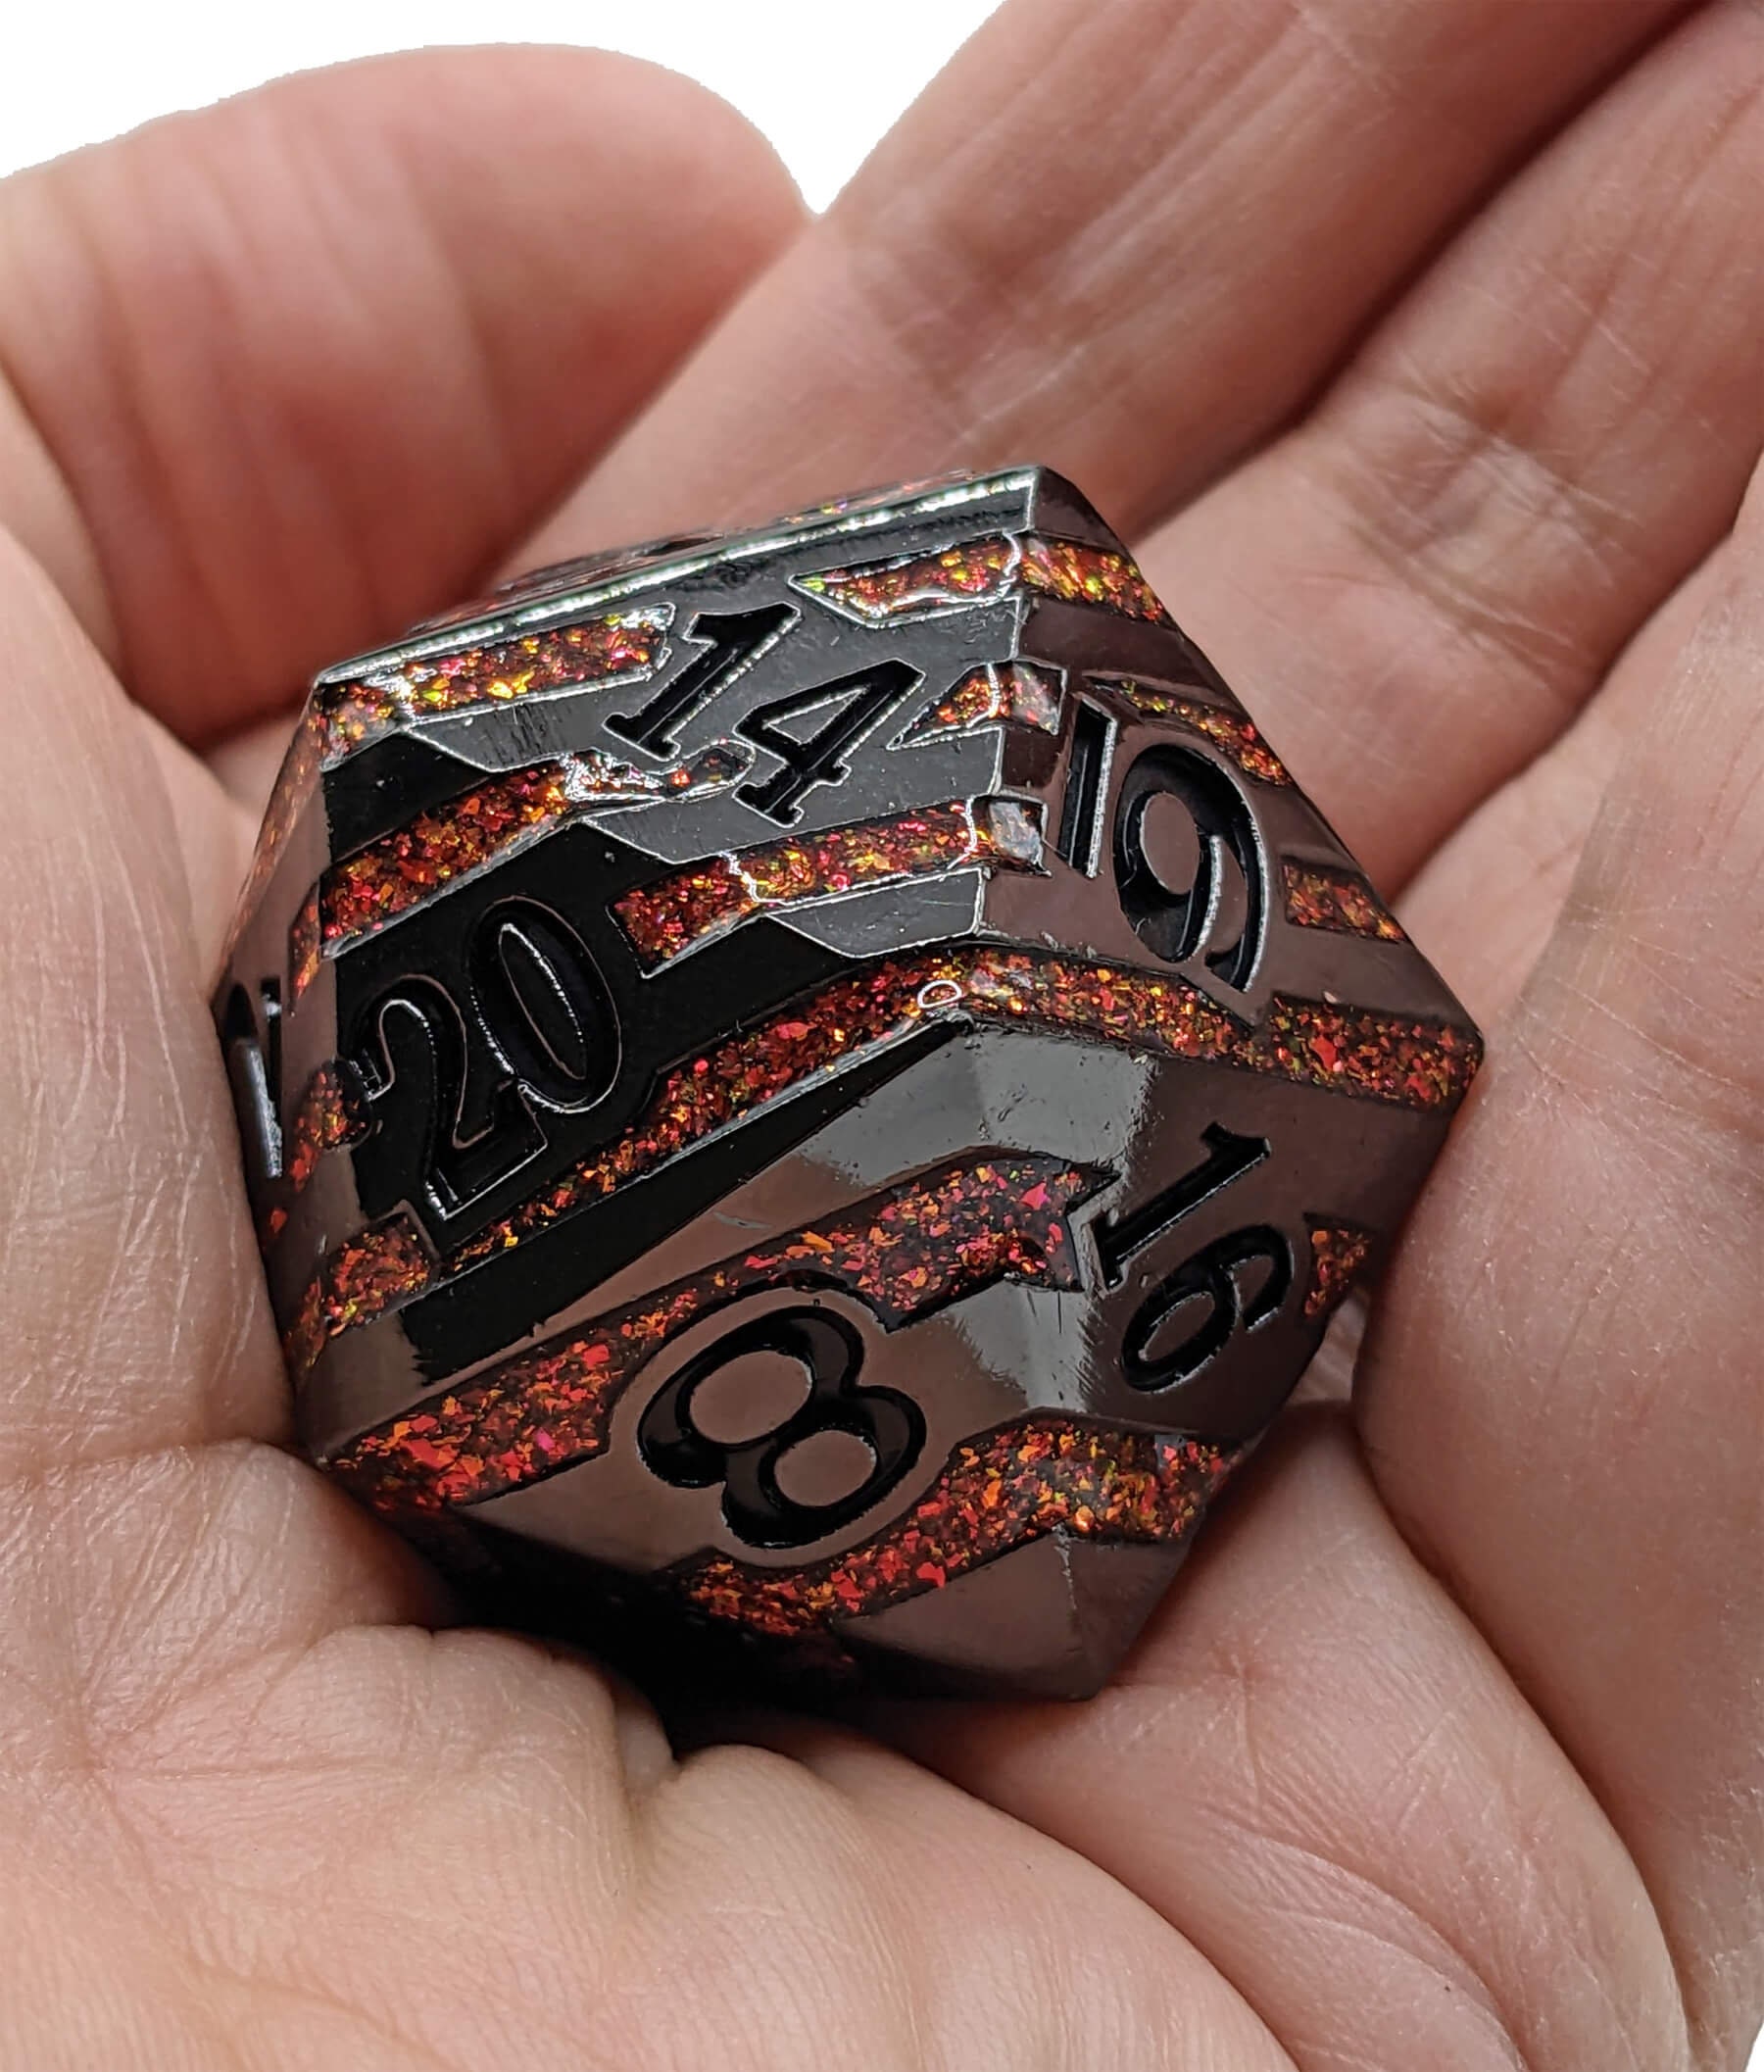 GIANT D20 Dungeons and Dragons Gamer Dice / Die Mold Silicone Rubber 